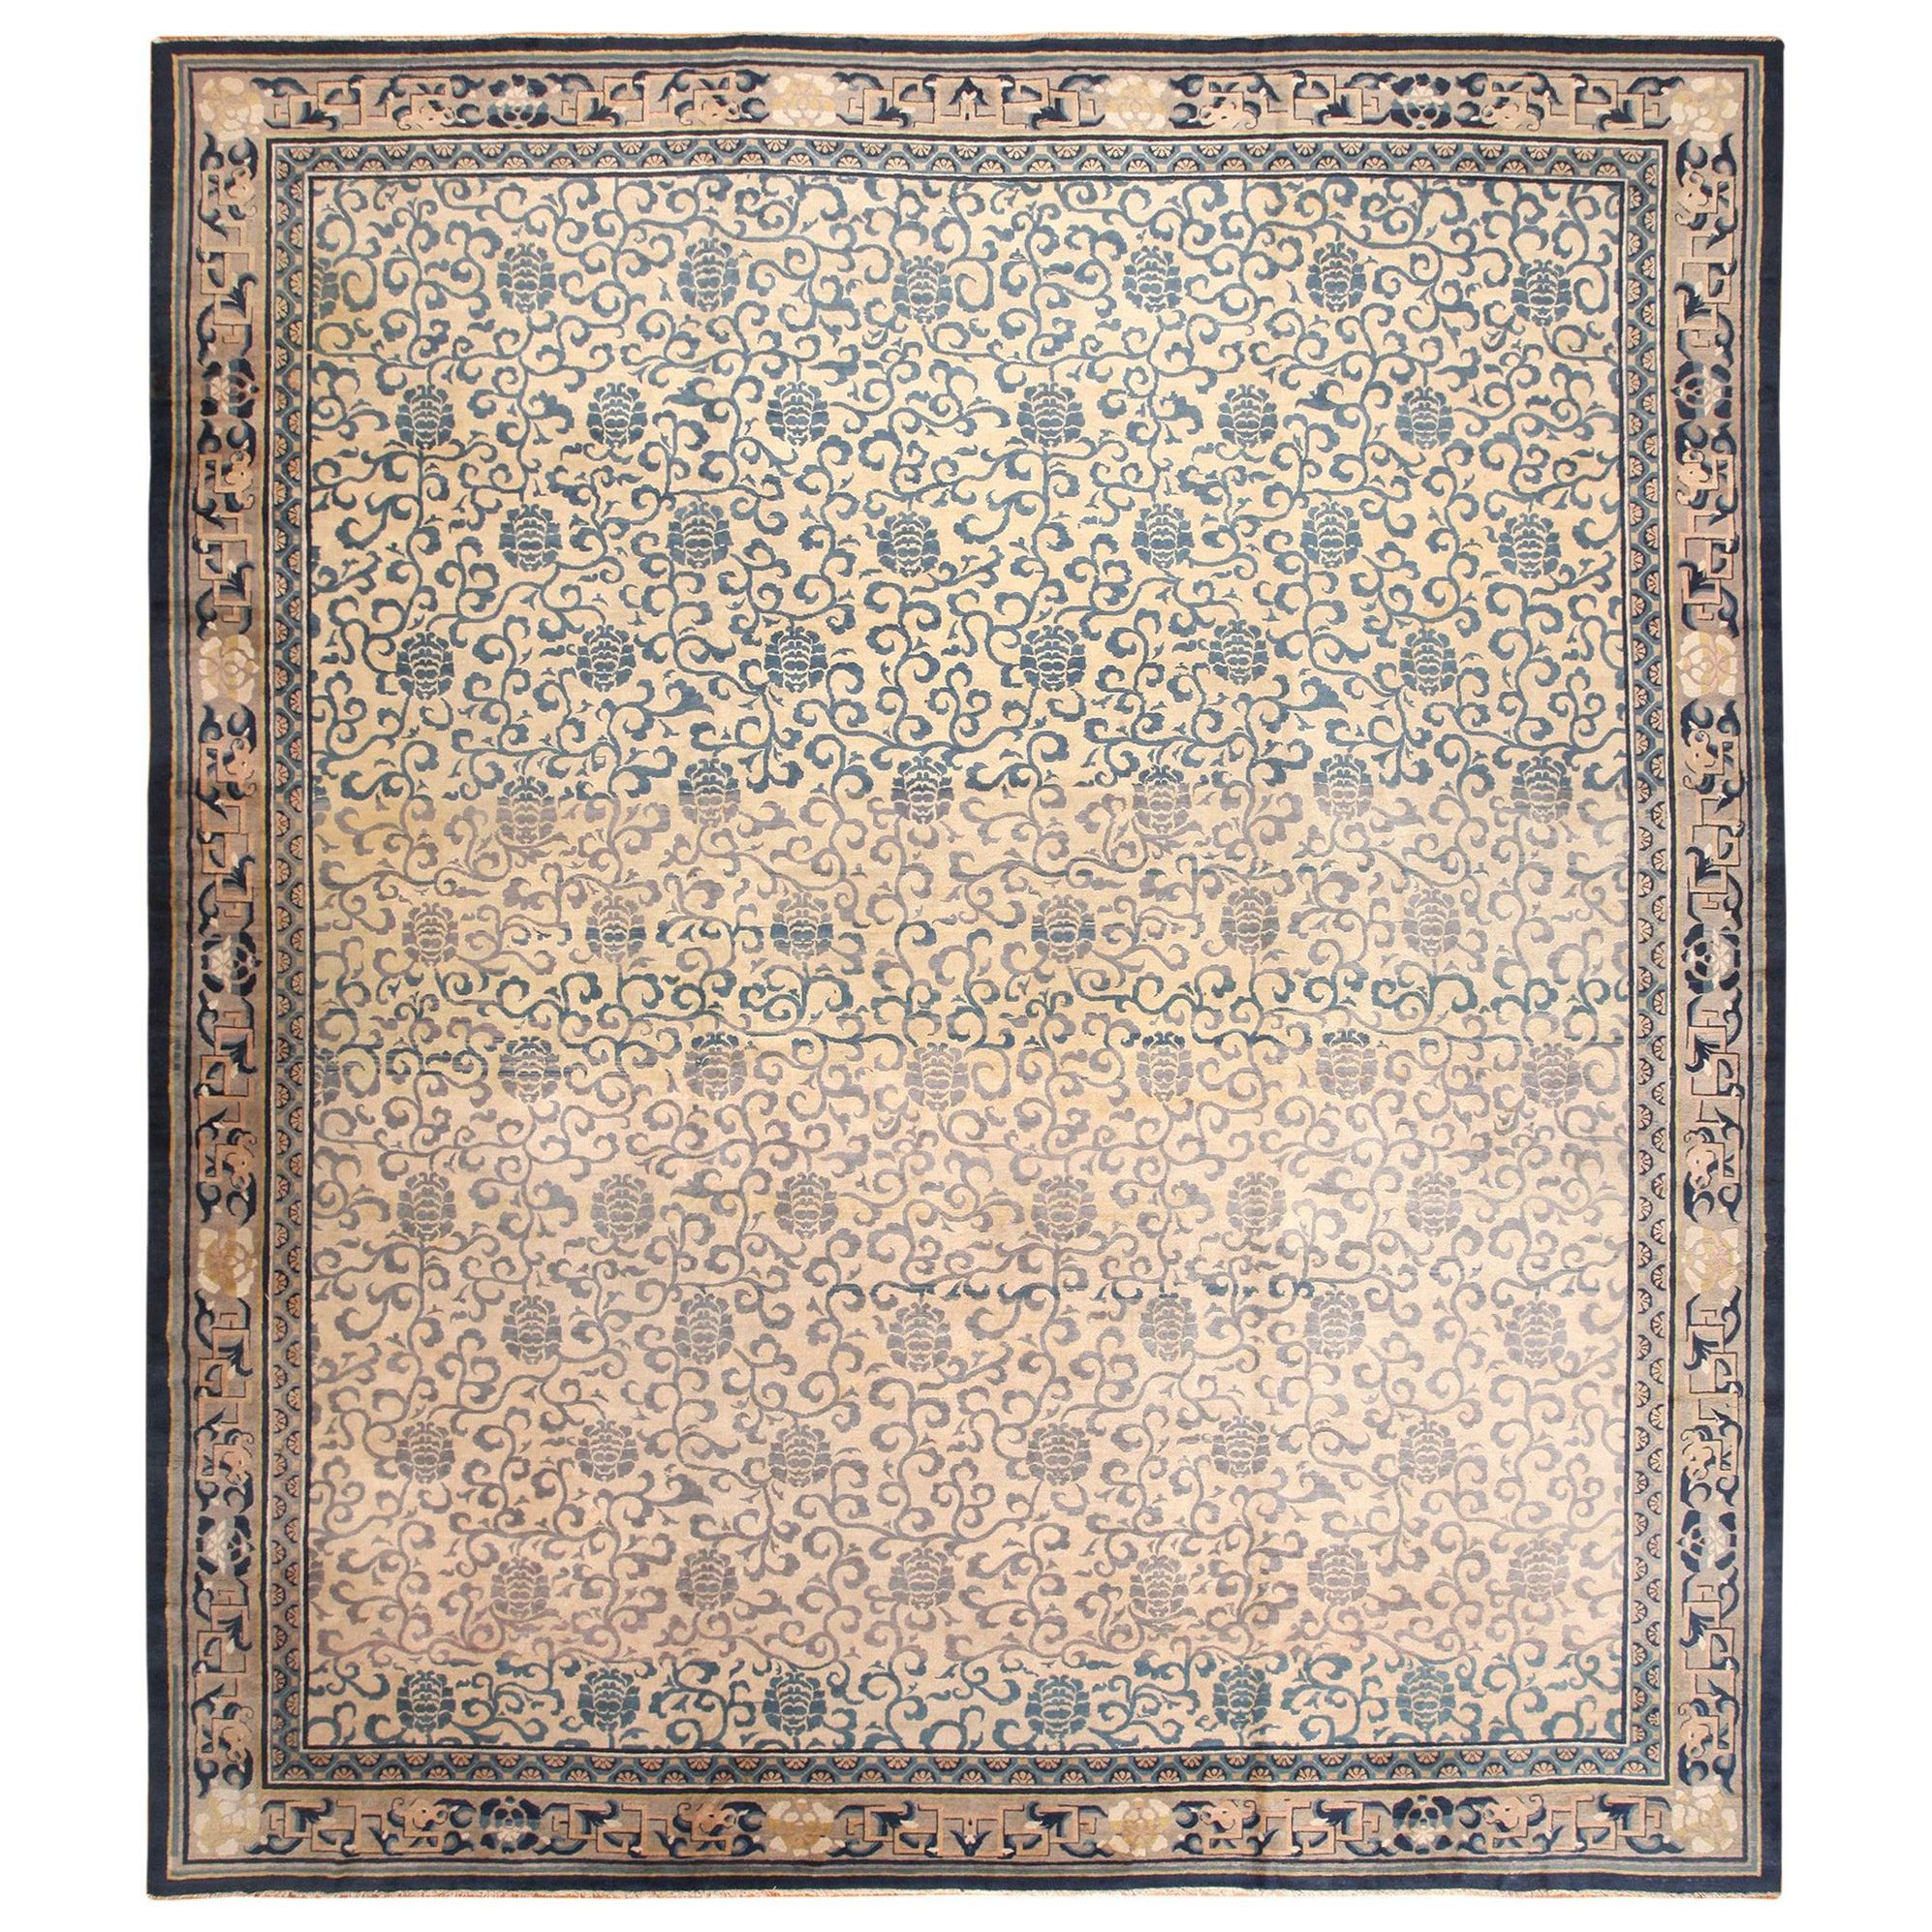 Nazmiyal Collection Antique Chinese Rug. 14 ft. 7 in x 17 ft. 4 in